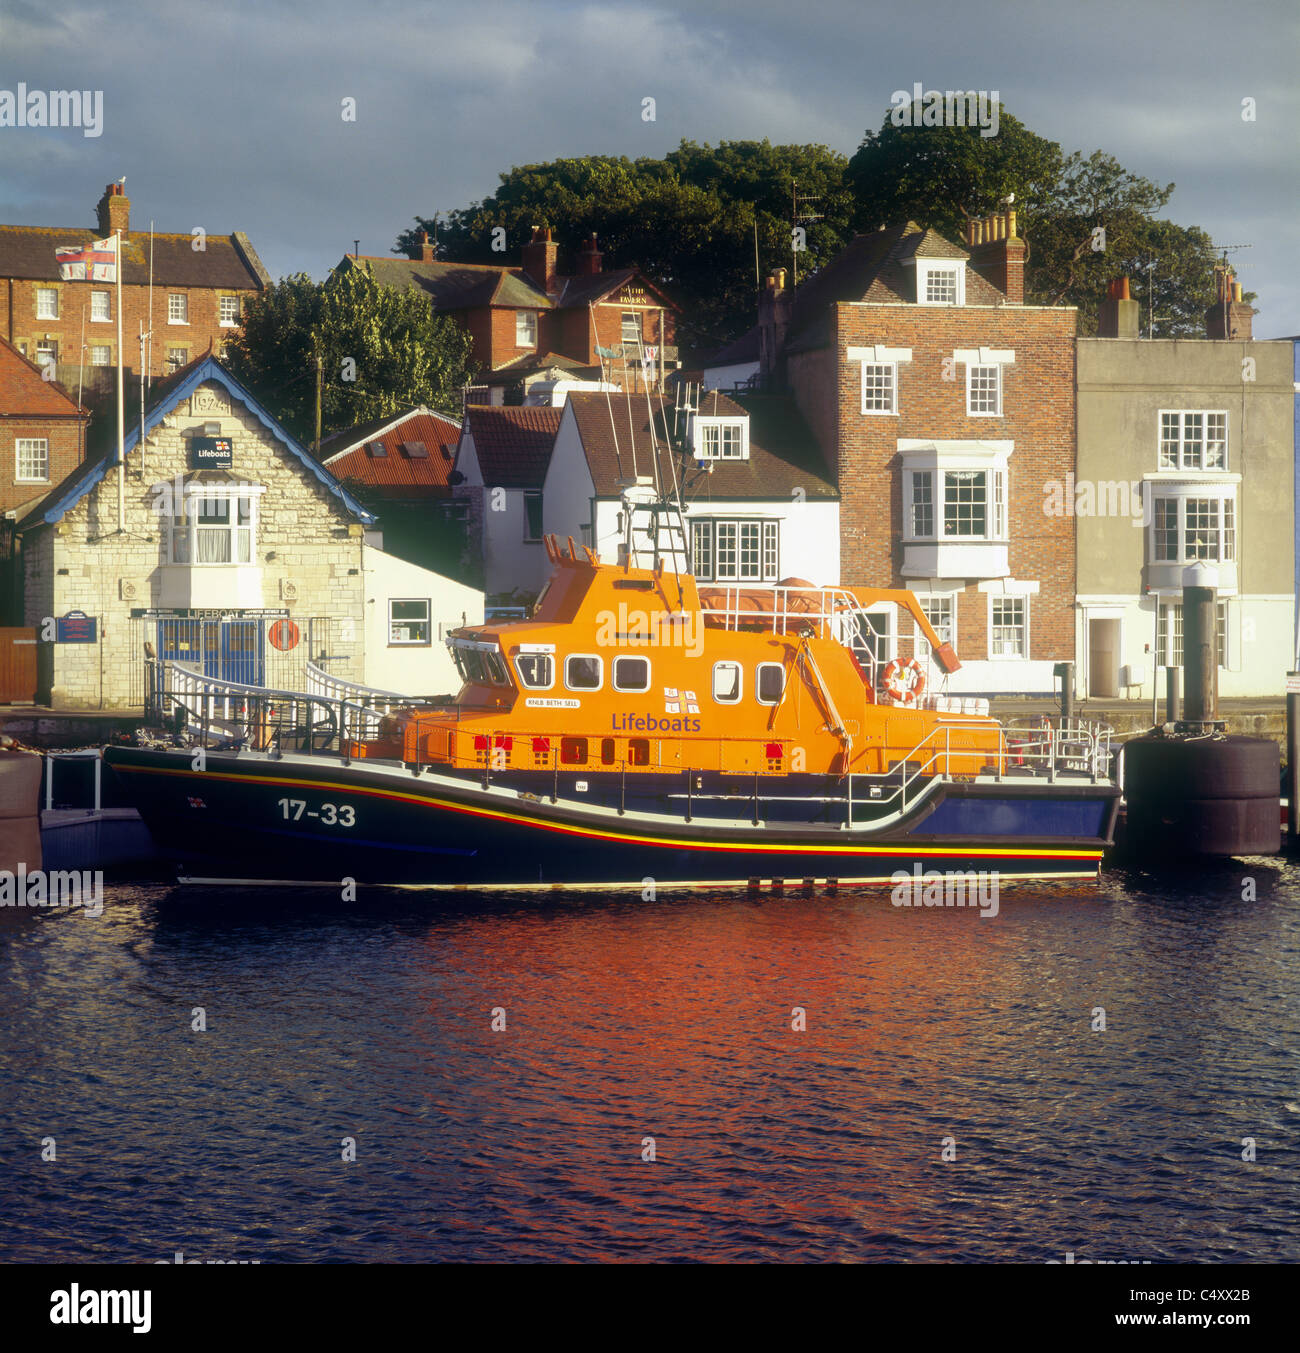 The Royal National Lifeboat Institution's Severn class lifeboat at the lifeboat station on Nothe Quay in Weymouth harbour Stock Photo